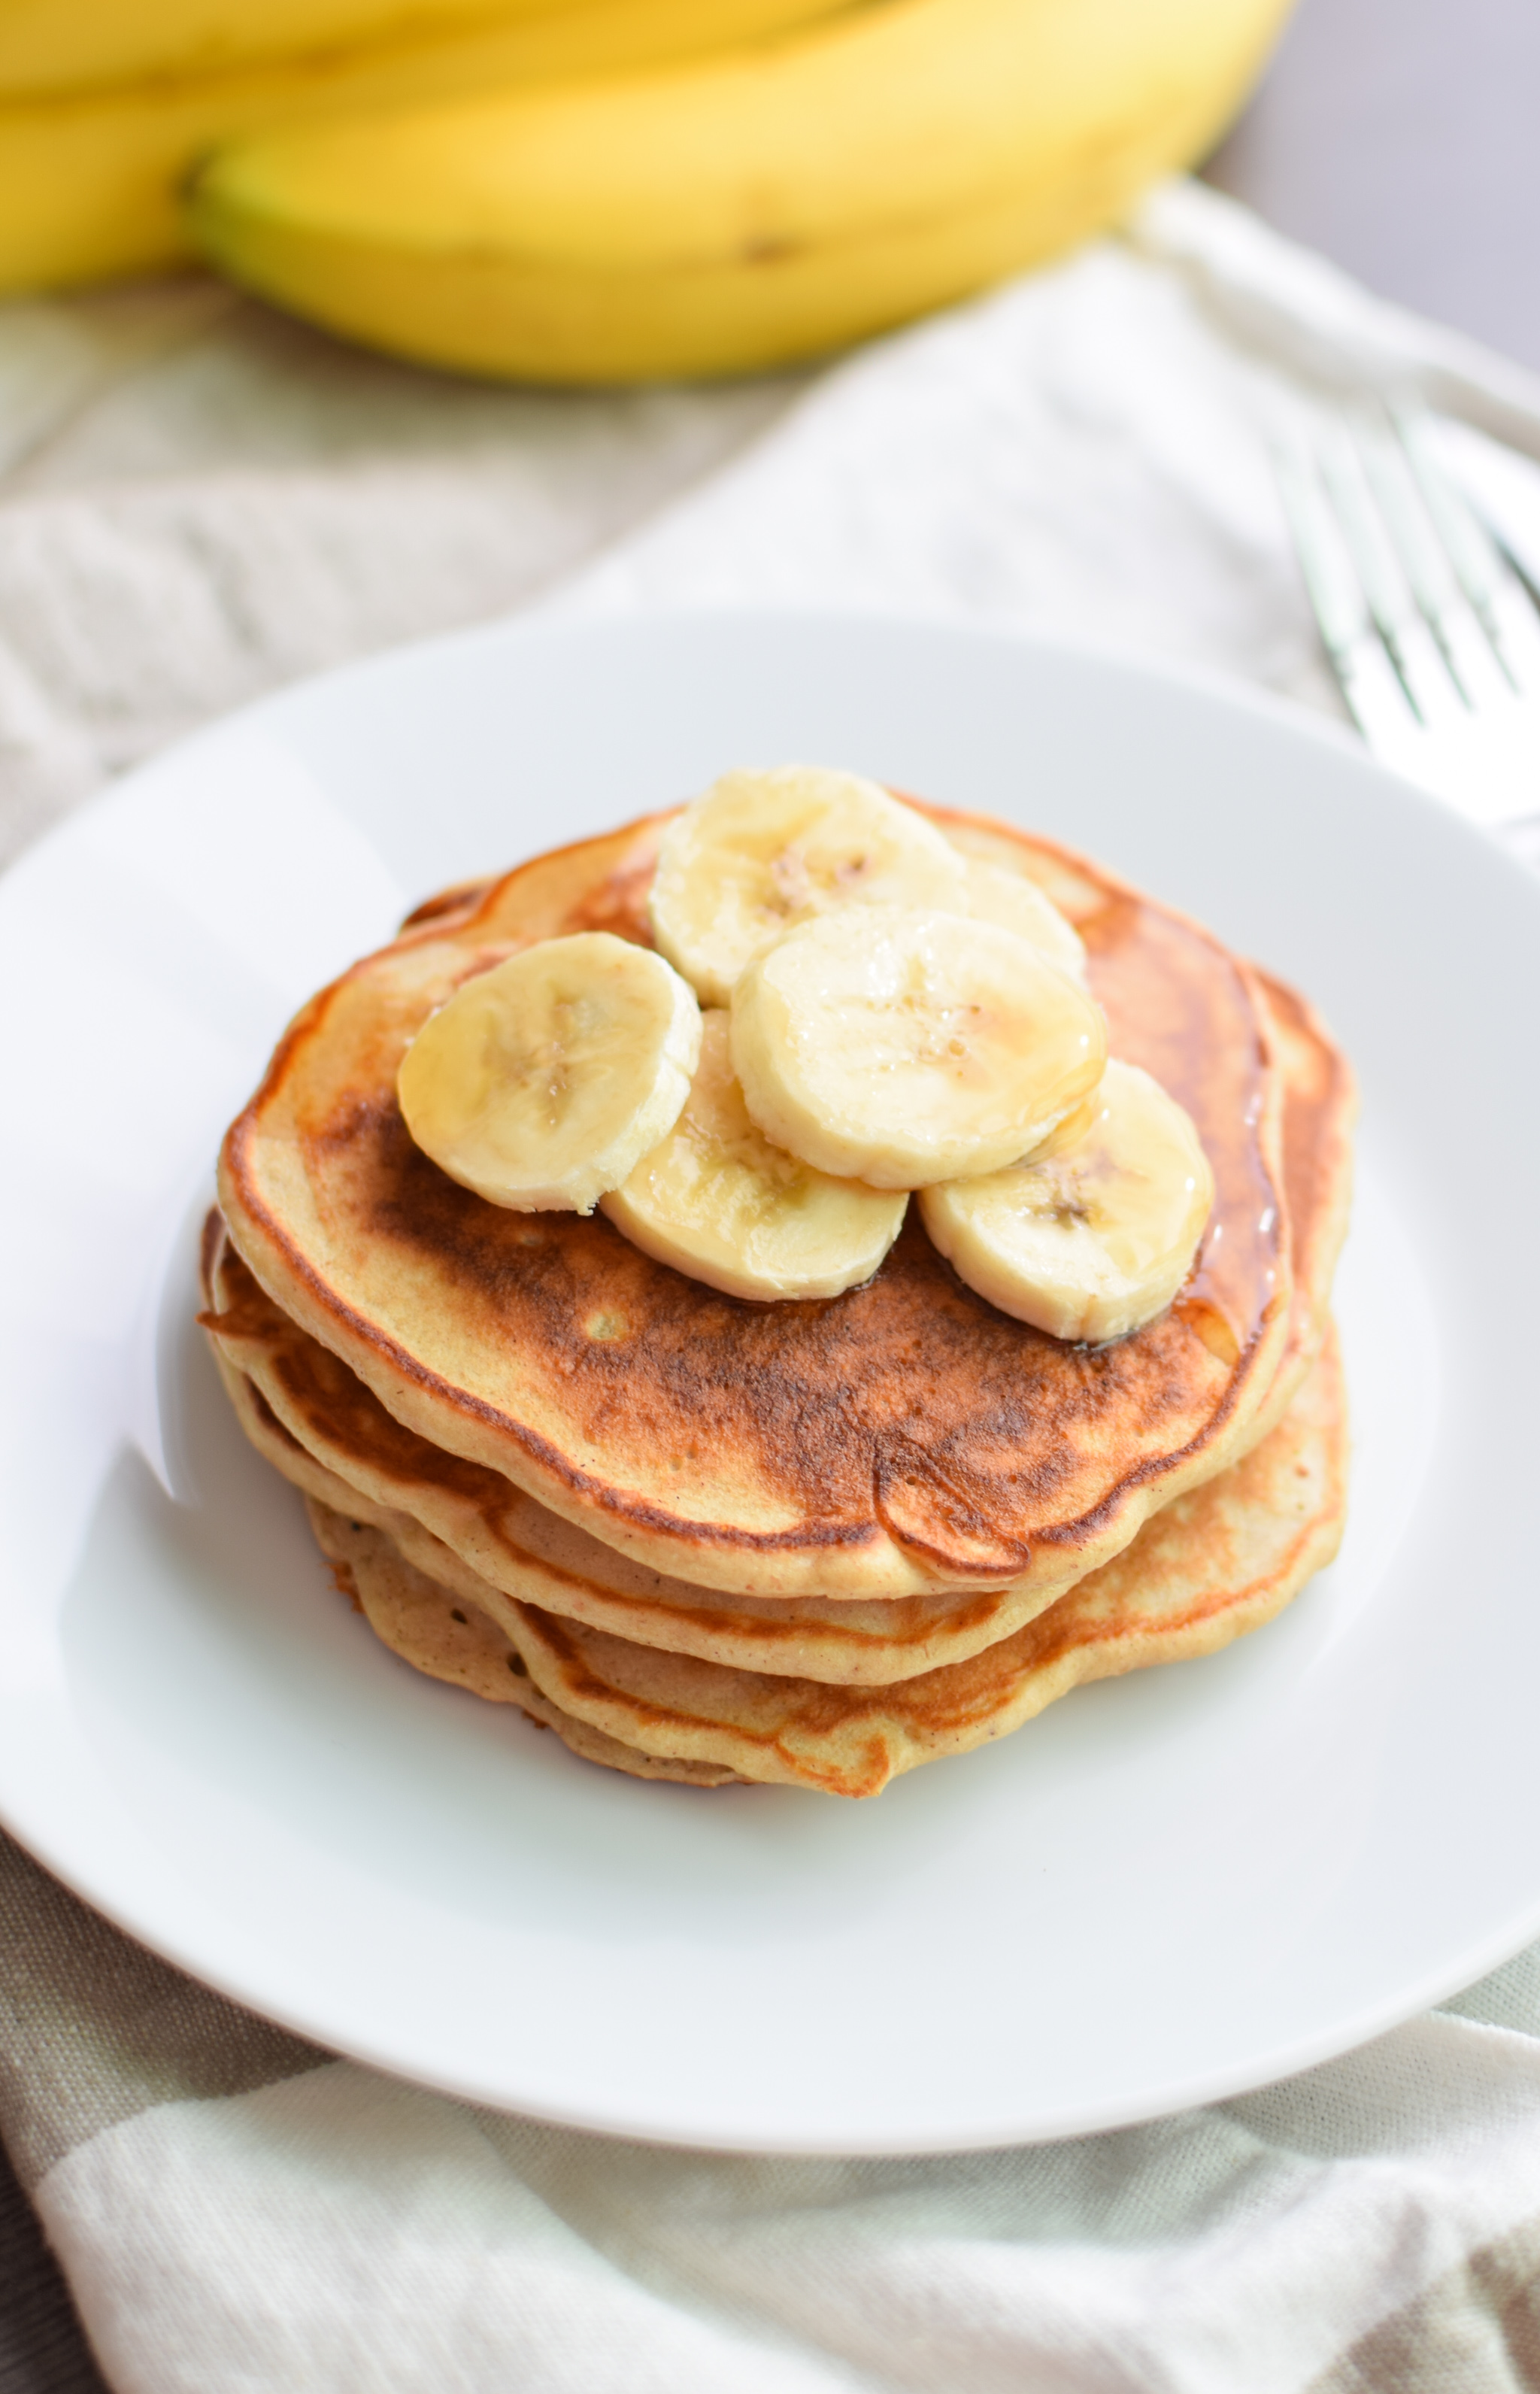 Banana Protein Pancakes Recipe - Delicious, healthy way to eat cake for breakfast! With a little extra protein :) - ProjectMealPlan.com